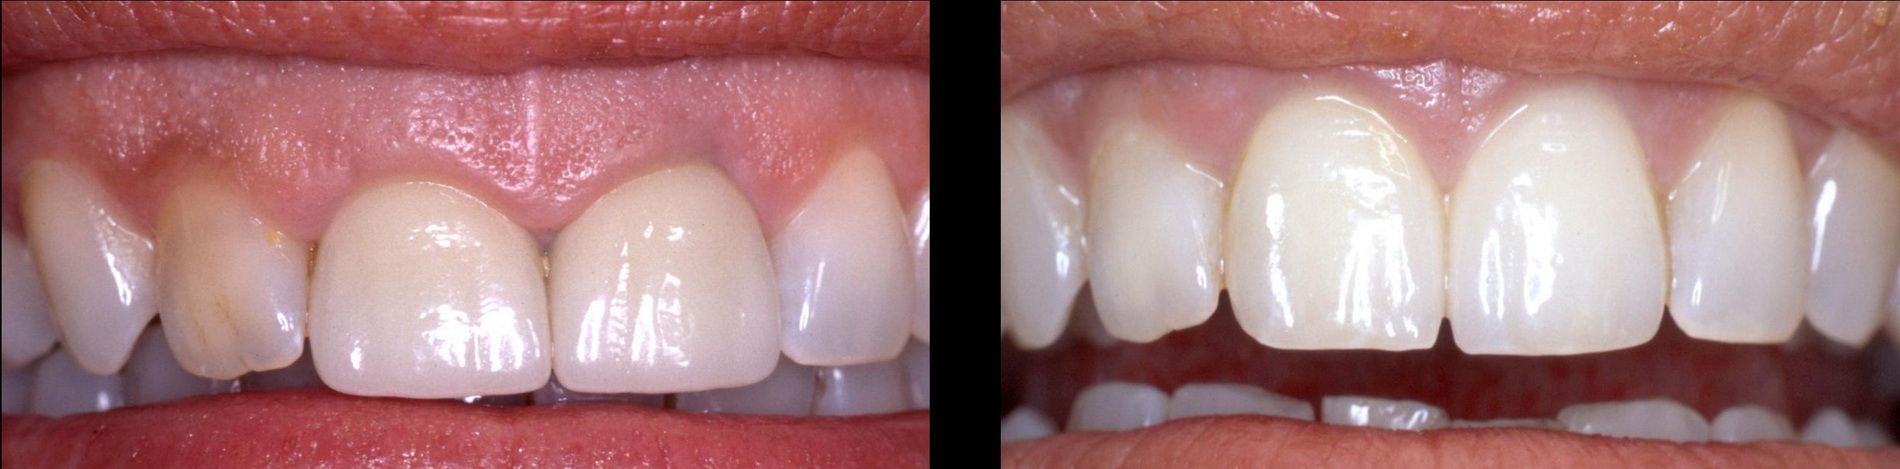 Aesthetic treatment of the gums, gingival smile or excess gum. Padrós Dental Clinic, dentist in Barcelona